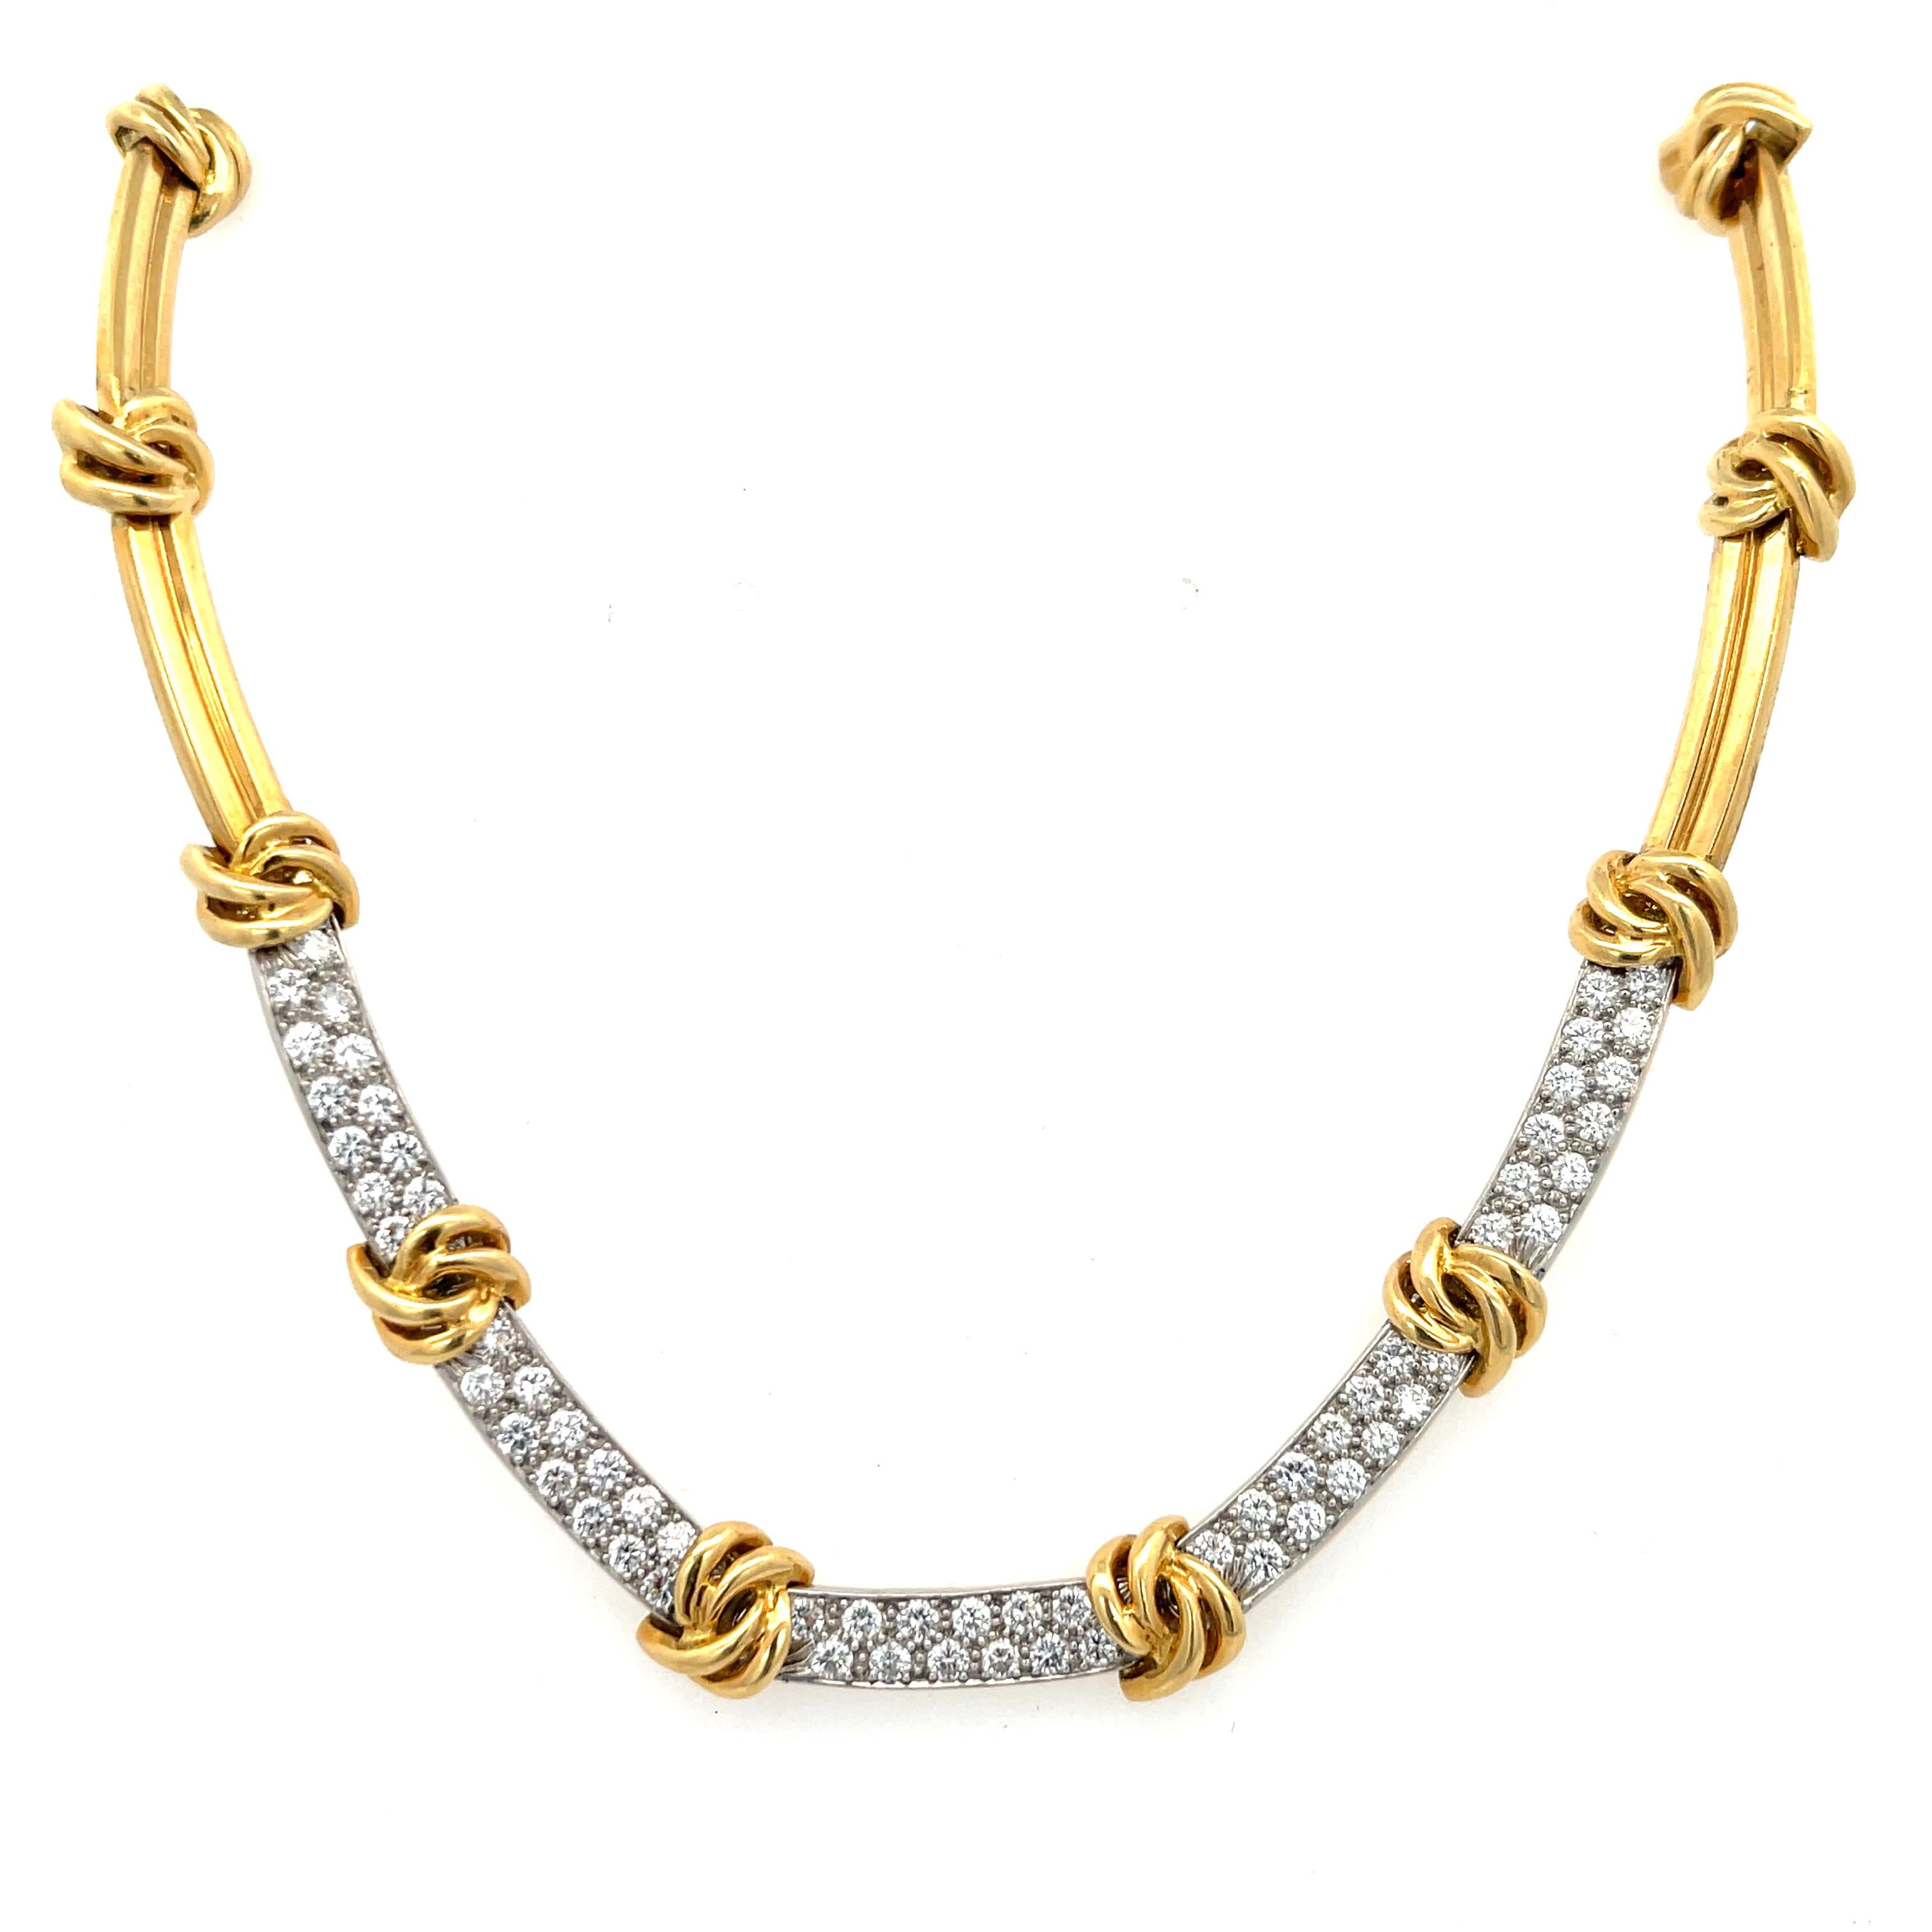 Estate Tiffany & Co. Knot Diamond Station Necklace in 18K Yellow Gold. The necklace features 3.90ctw of brilliant round diamonds. Then necklace is 15.5